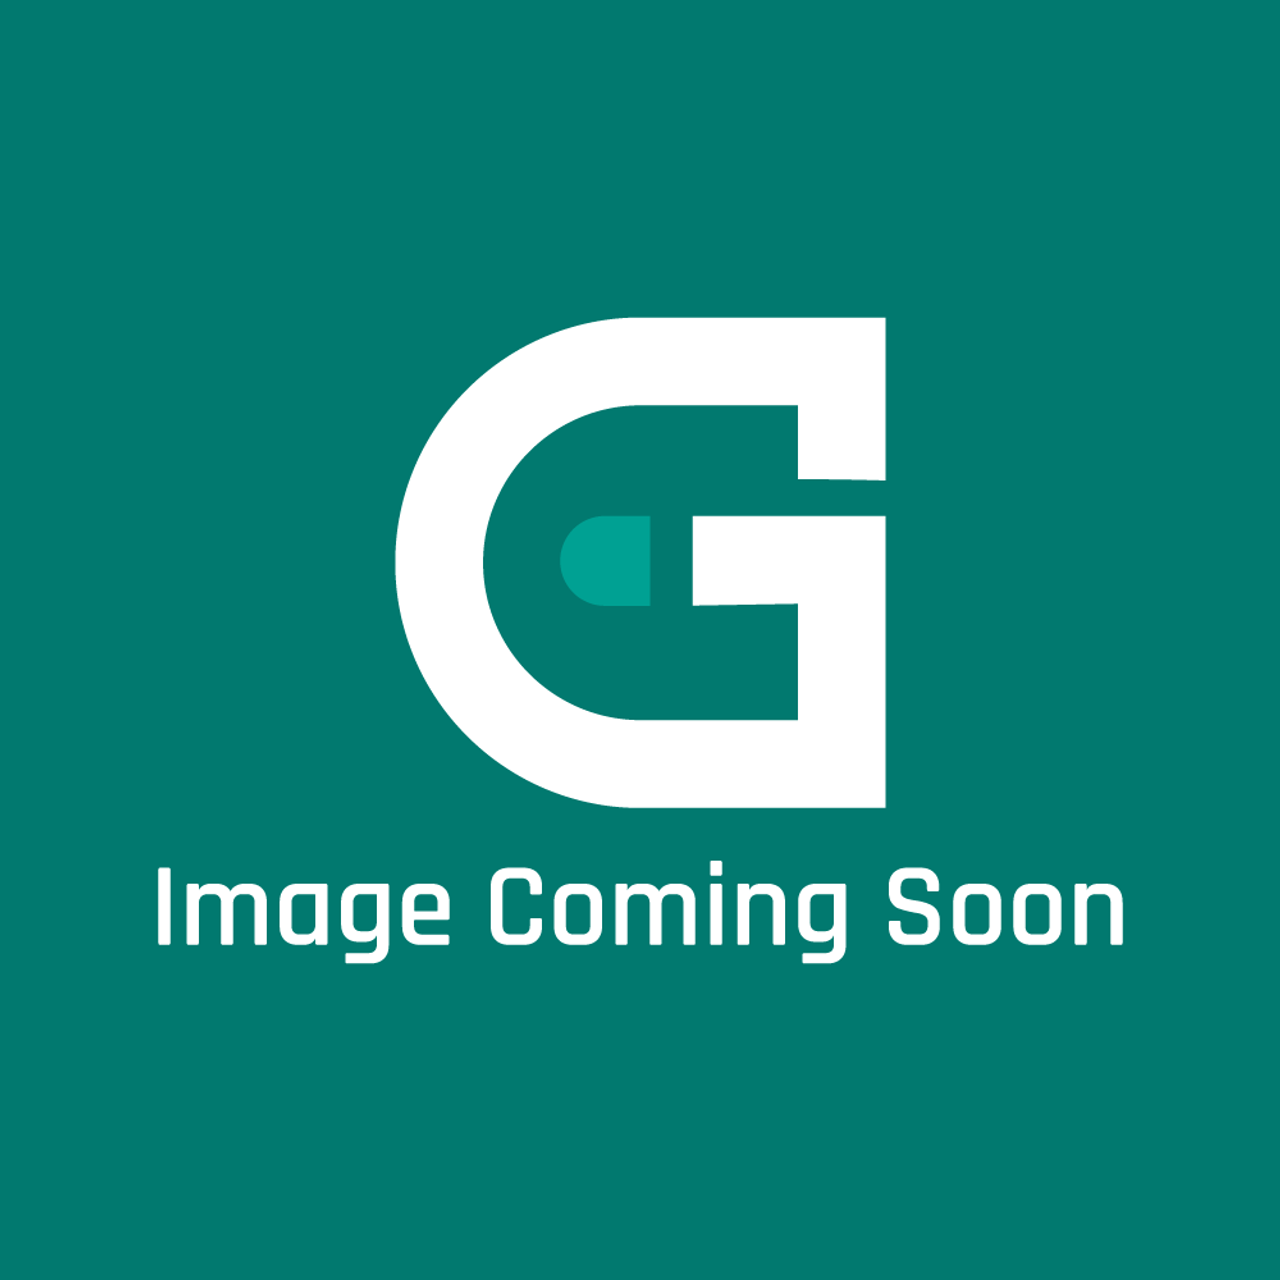 GE Appliances WB15X31828 - Brushed Black Stainless Wall Oven Handle - Image Coming Soon!